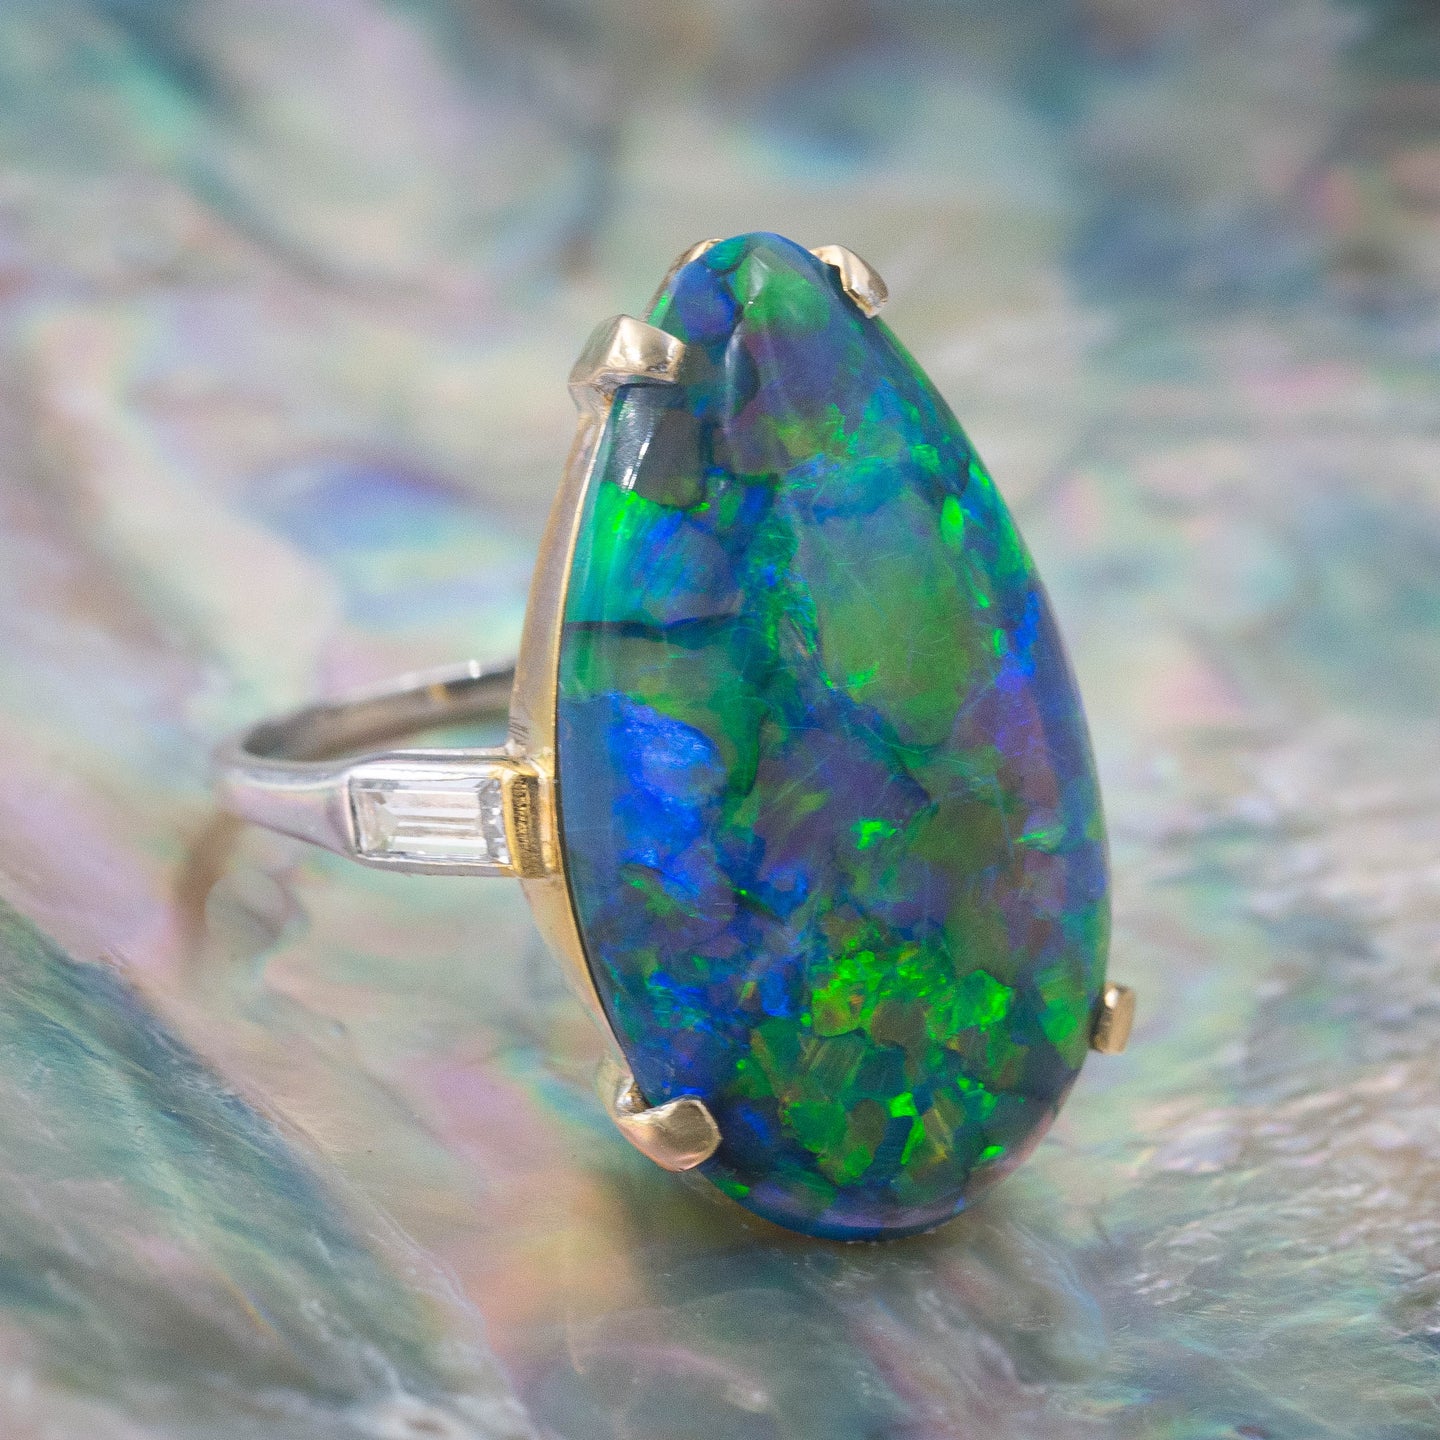 Premium Photo | A gold ring with a black opal stone on it